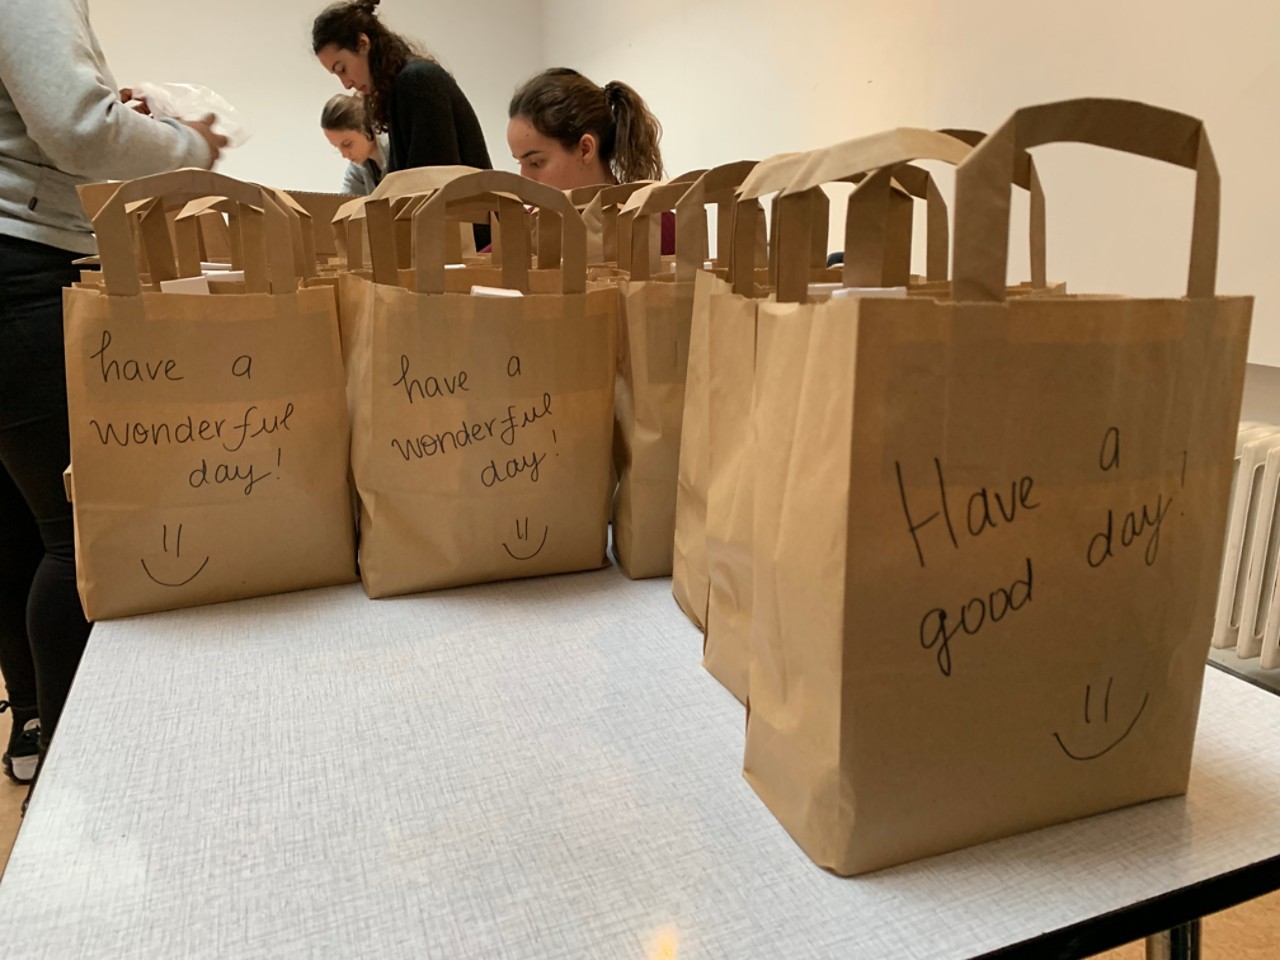 Bags prepared as part of the Street Kindness project